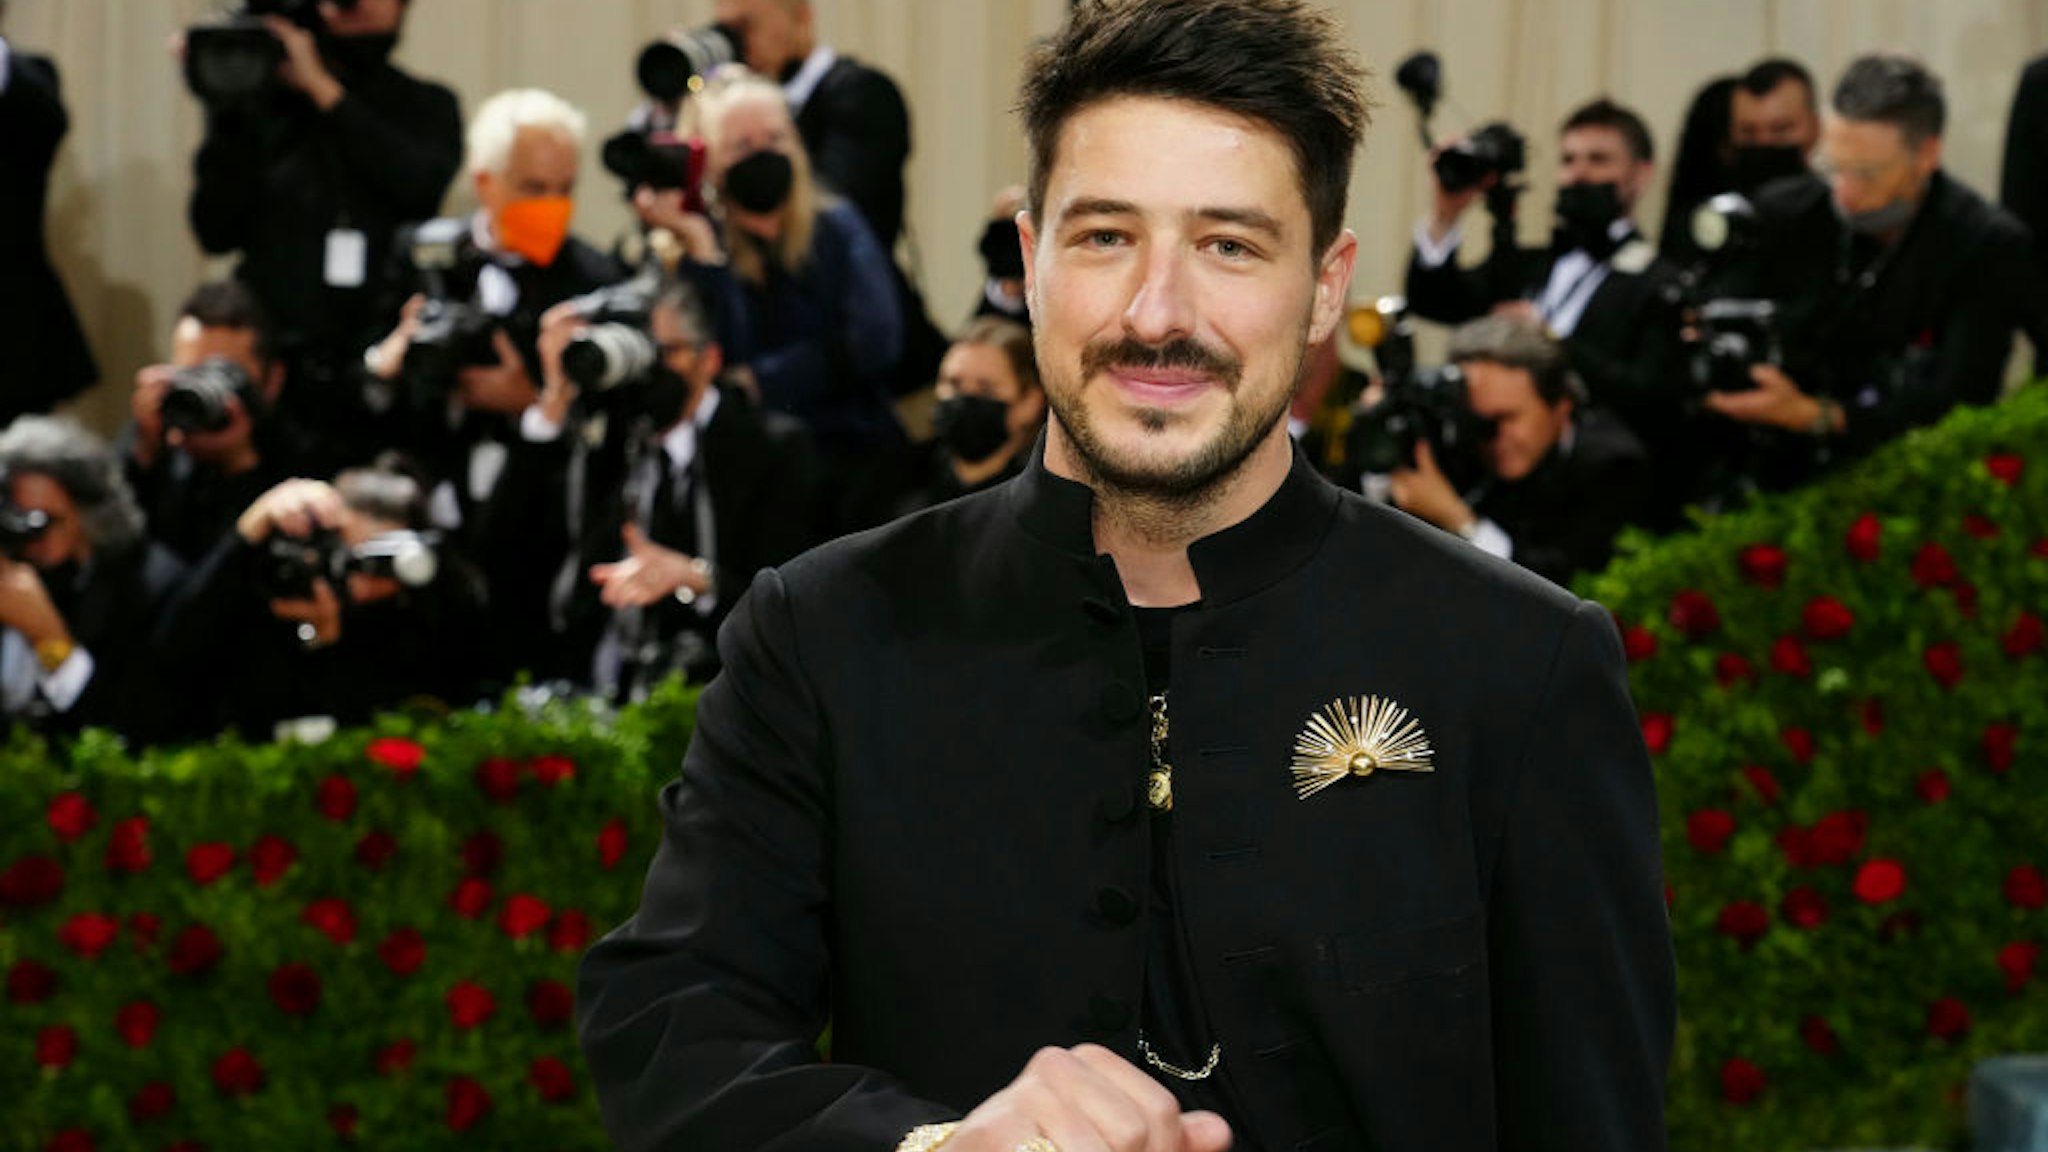 NEW YORK, NEW YORK - MAY 02: Marcus Mumford attends The 2022 Met Gala Celebrating "In America: An Anthology of Fashion" at The Metropolitan Museum of Art on May 02, 2022 in New York City. (Photo by Jeff Kravitz/FilmMagic)